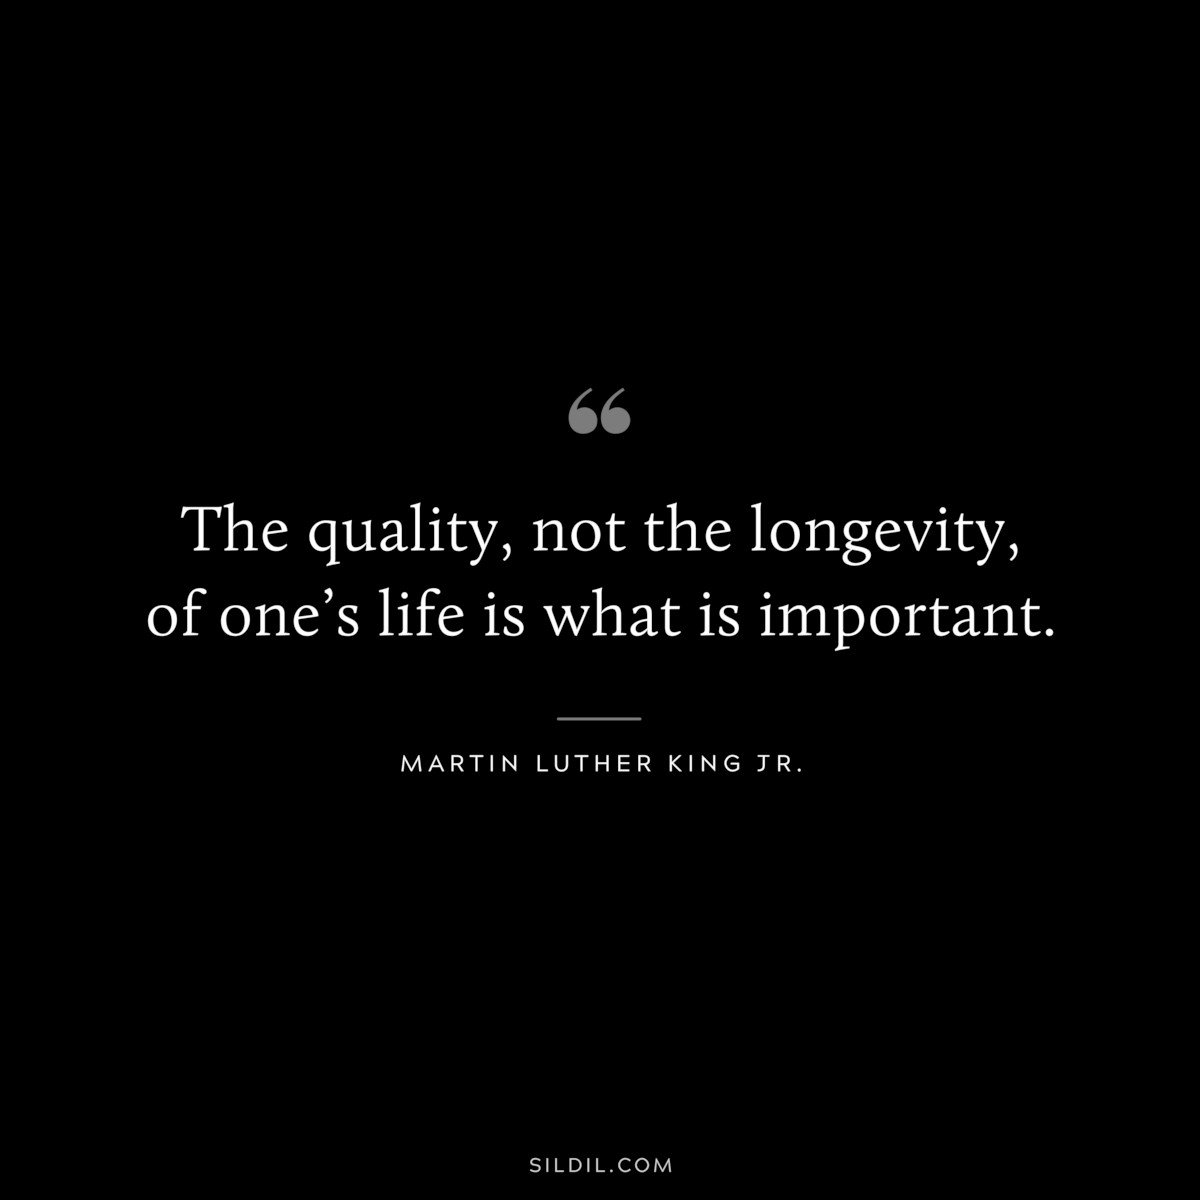 The quality, not the longevity, of one’s life is what is important. ― Martin Luther King Jr.